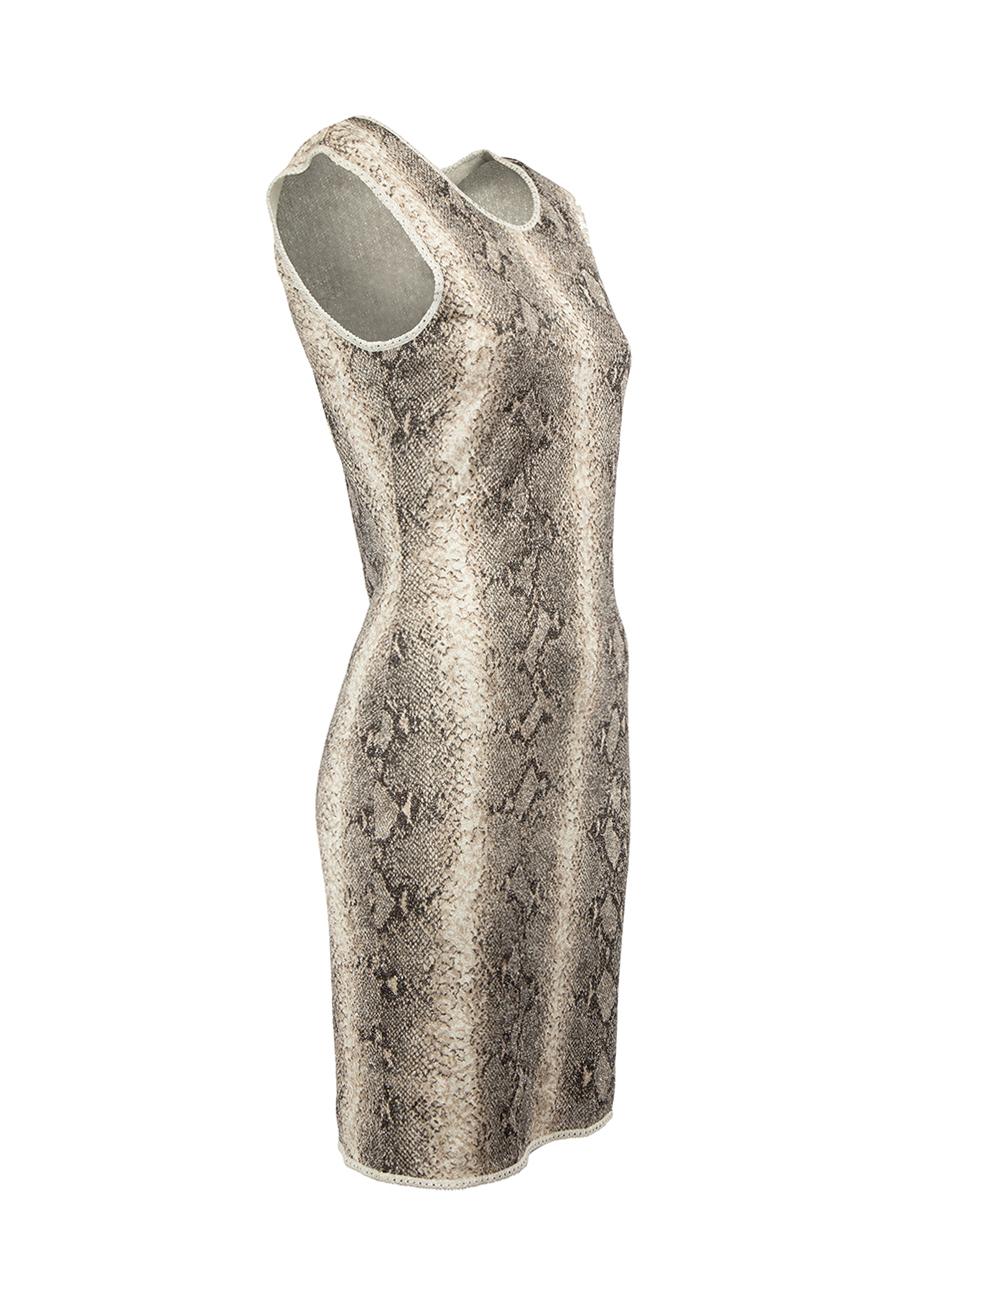 CONDITION is Very good. Hardly any visible wear to dress is evident on this used John Galliano designer resale item.



Details


Metallic grey

Viscose

Knee length knitted dress

Snakeskin pattern

Round neckline

Side zip closure





Made in